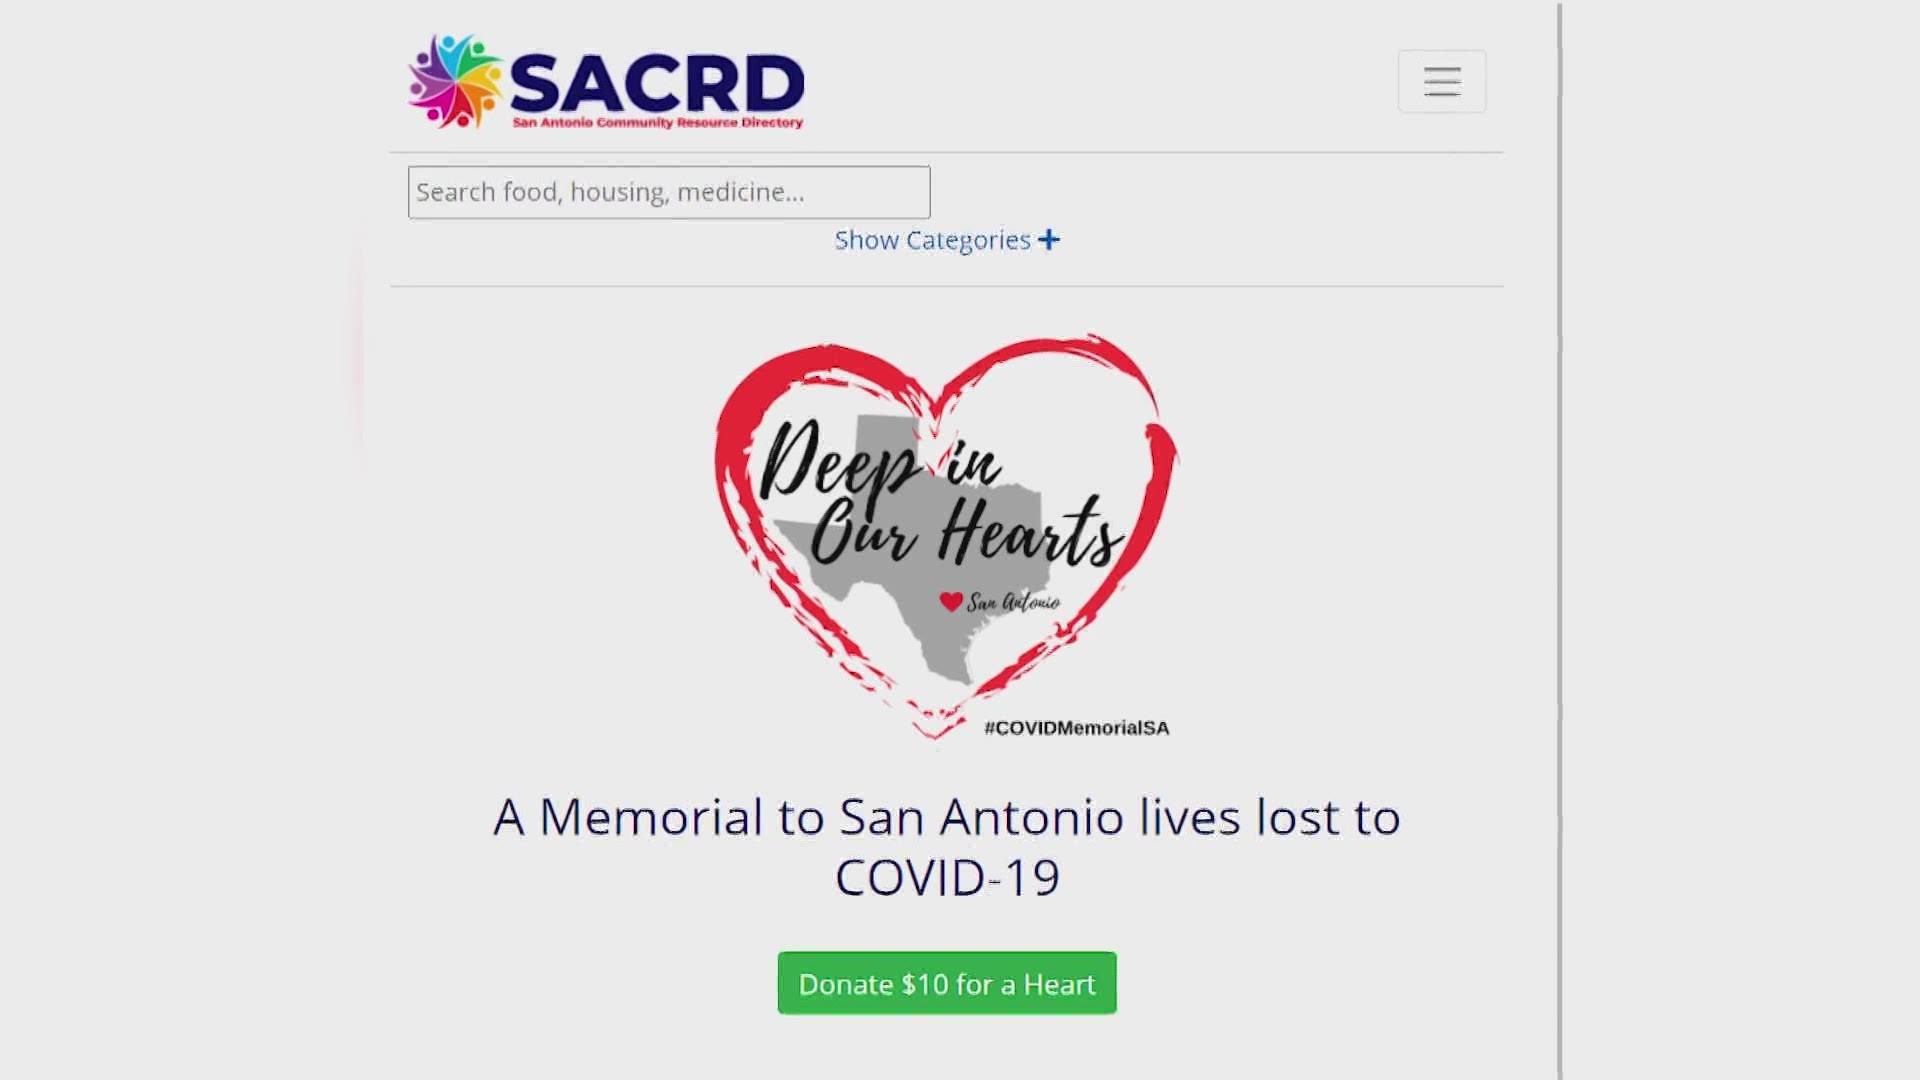 The City of San Antonio is planning a memorial for the thousands of people who lost their lives to COVID-19.